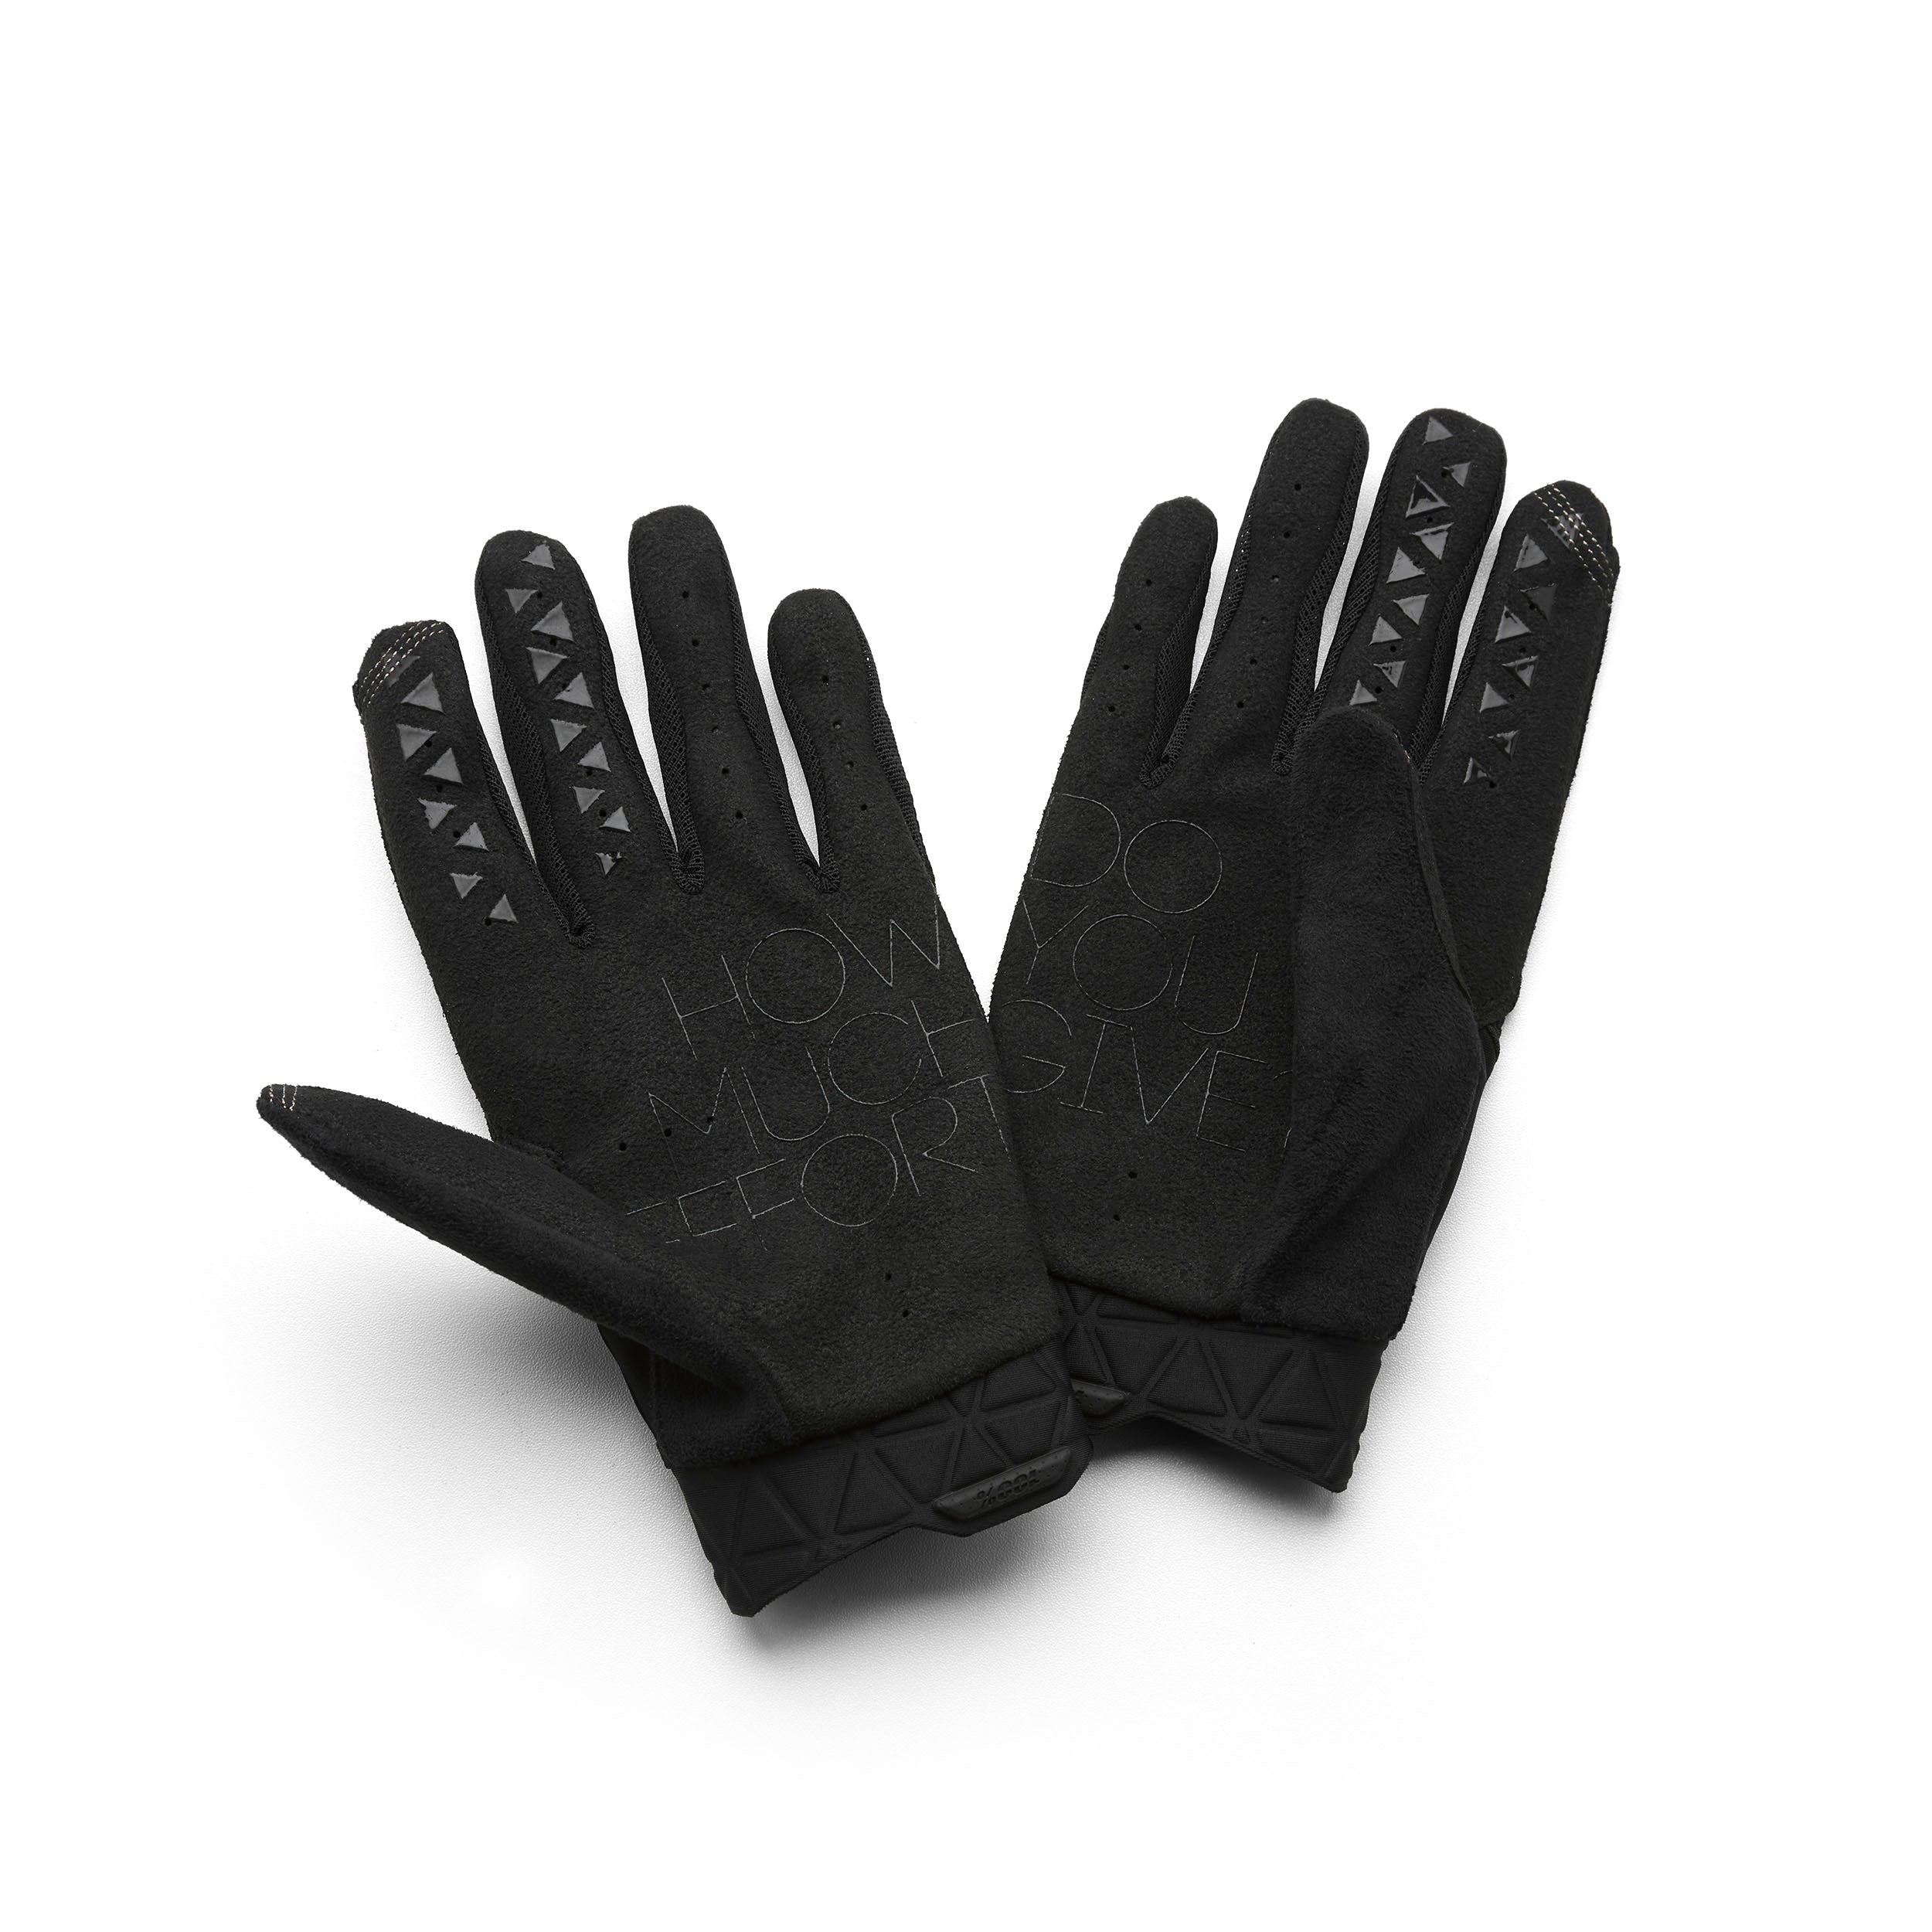 Leather gloves Louis Vuitton Black size L International in Leather